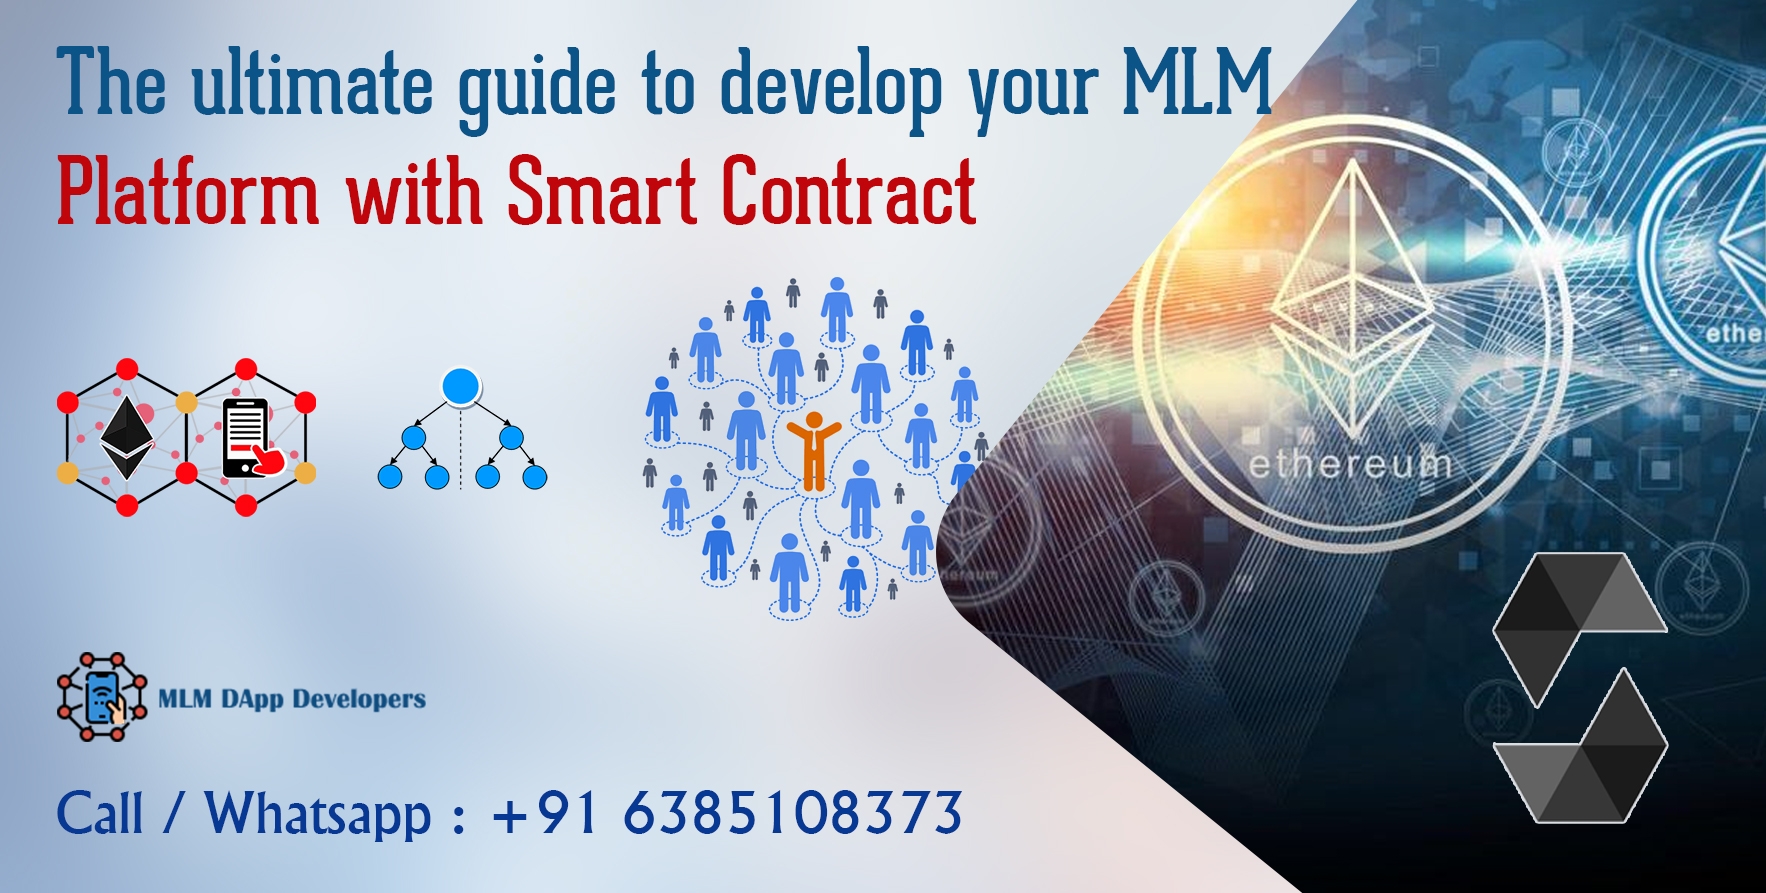 Decentralized MLM Matrix Plan Software with DApp smart contract